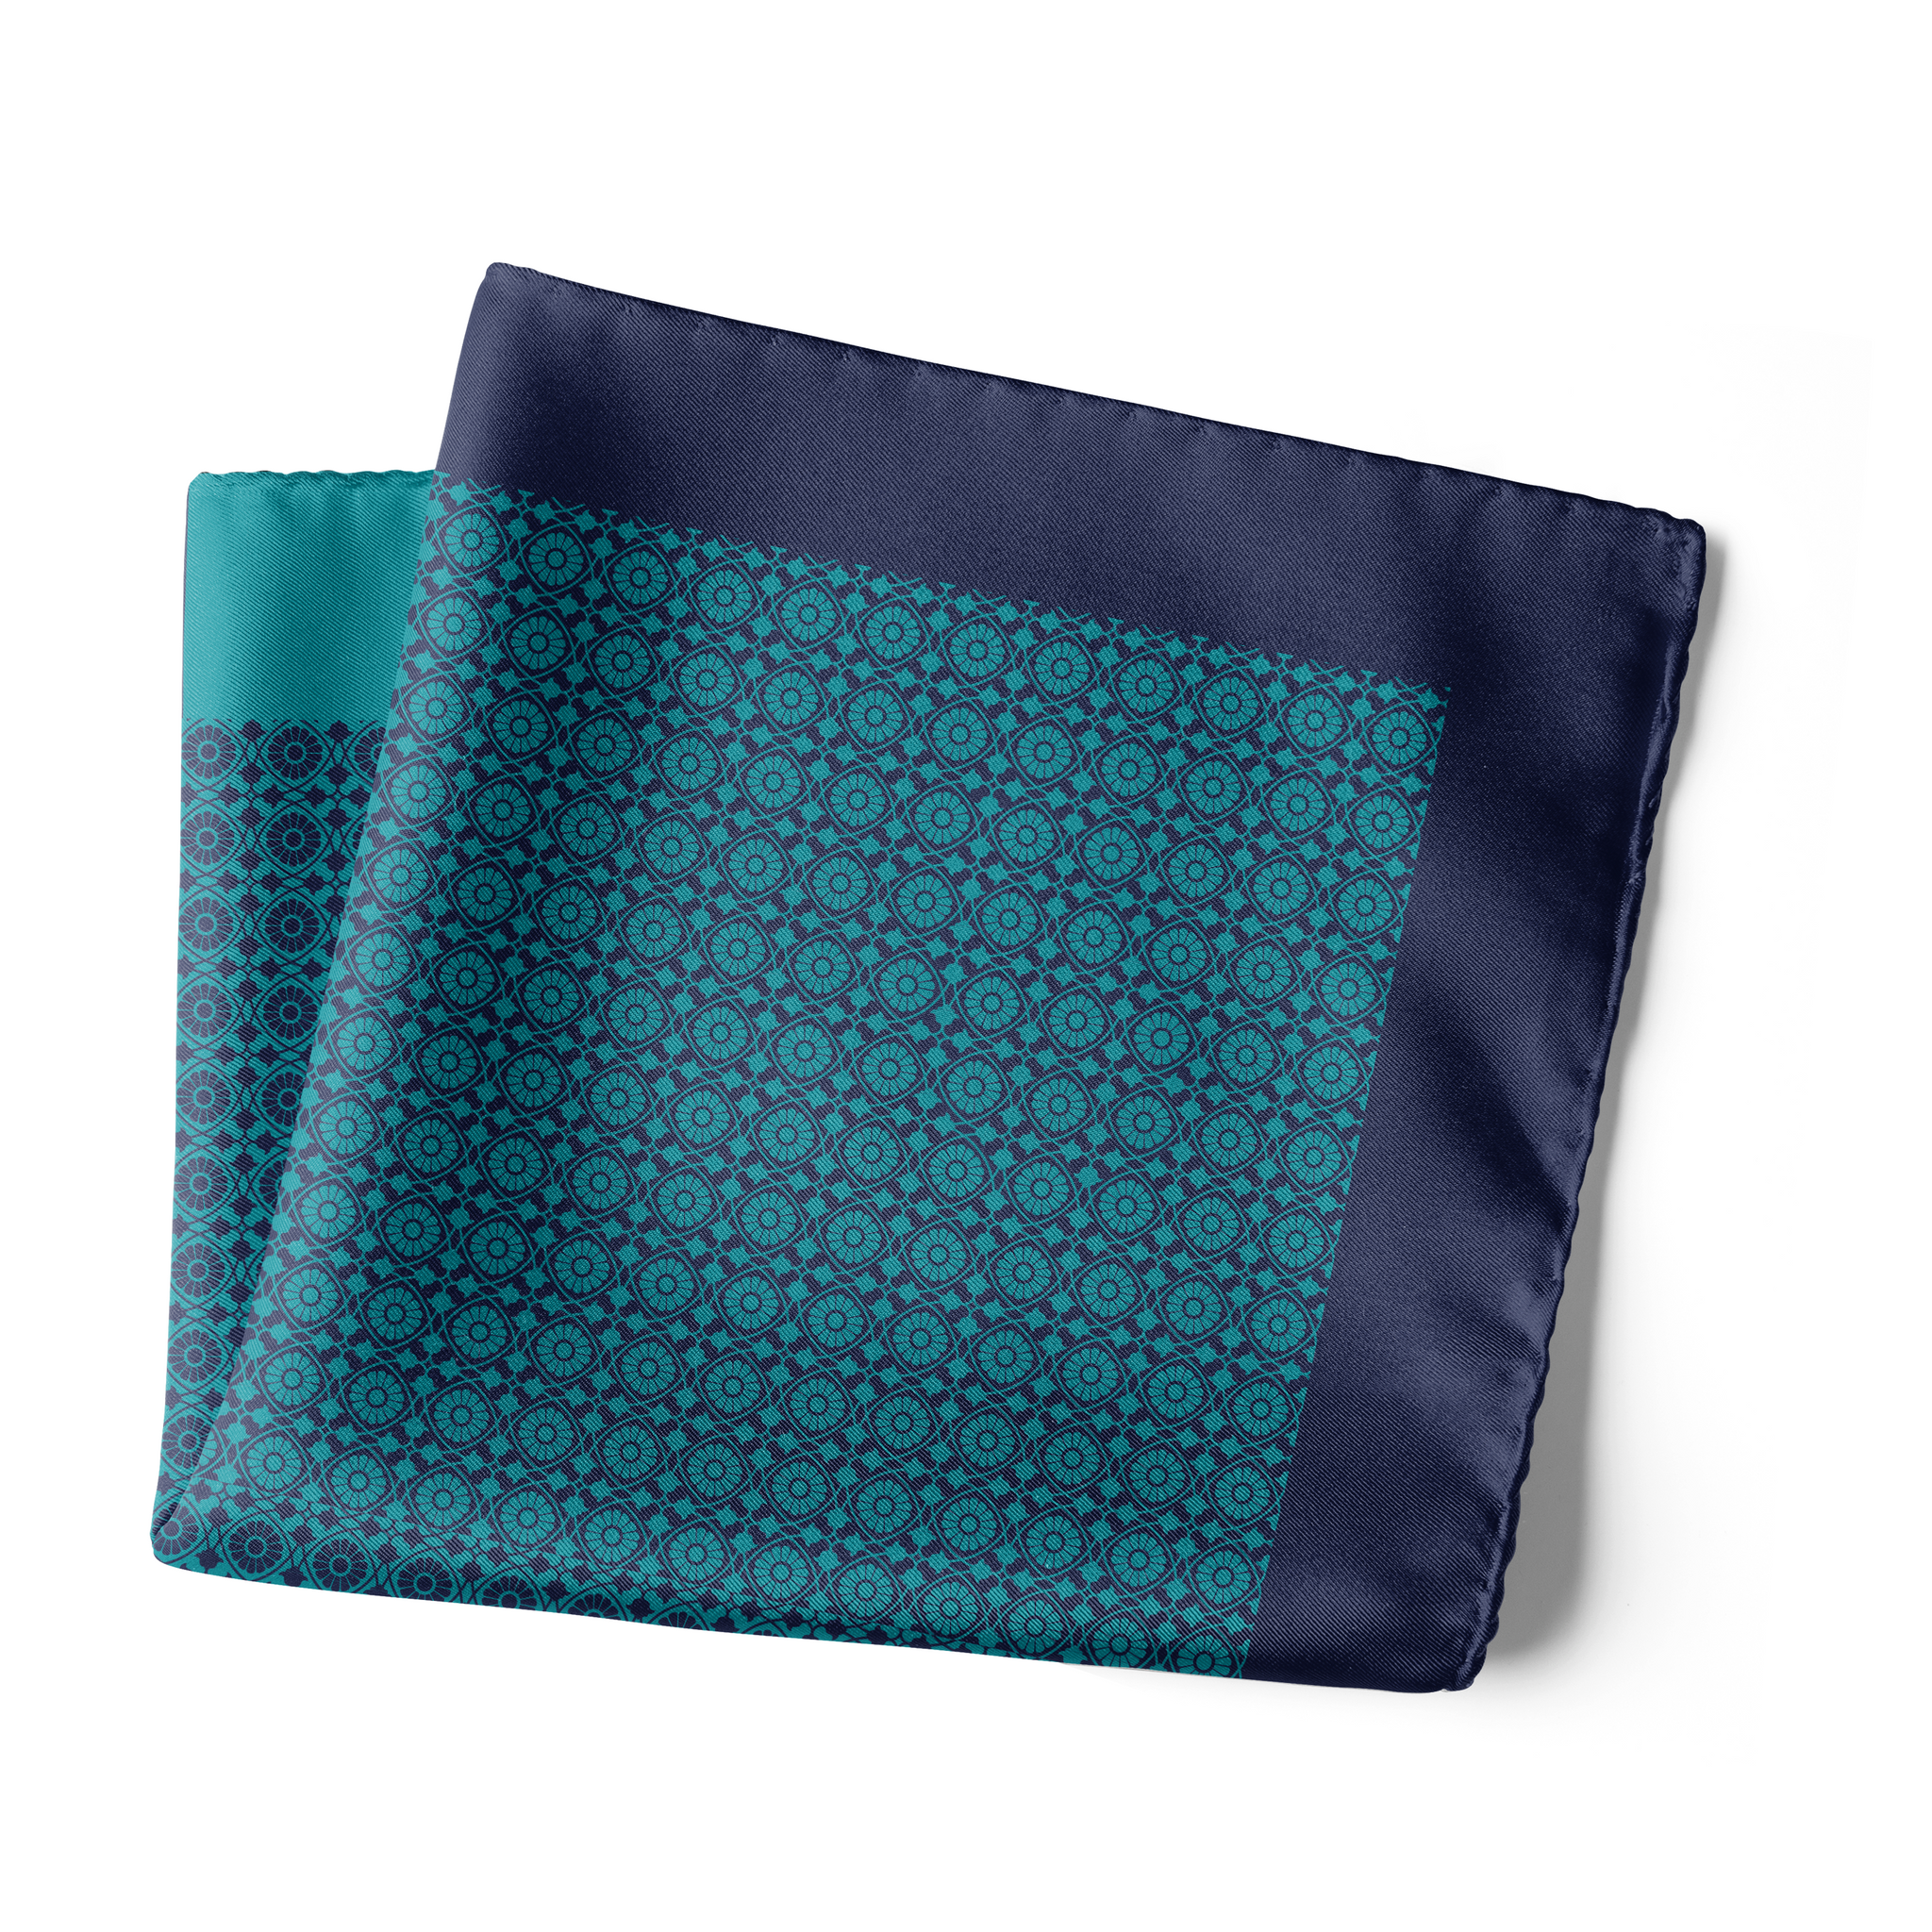 Chokore Blue color Silk Pocket Square -Indian At Heart line